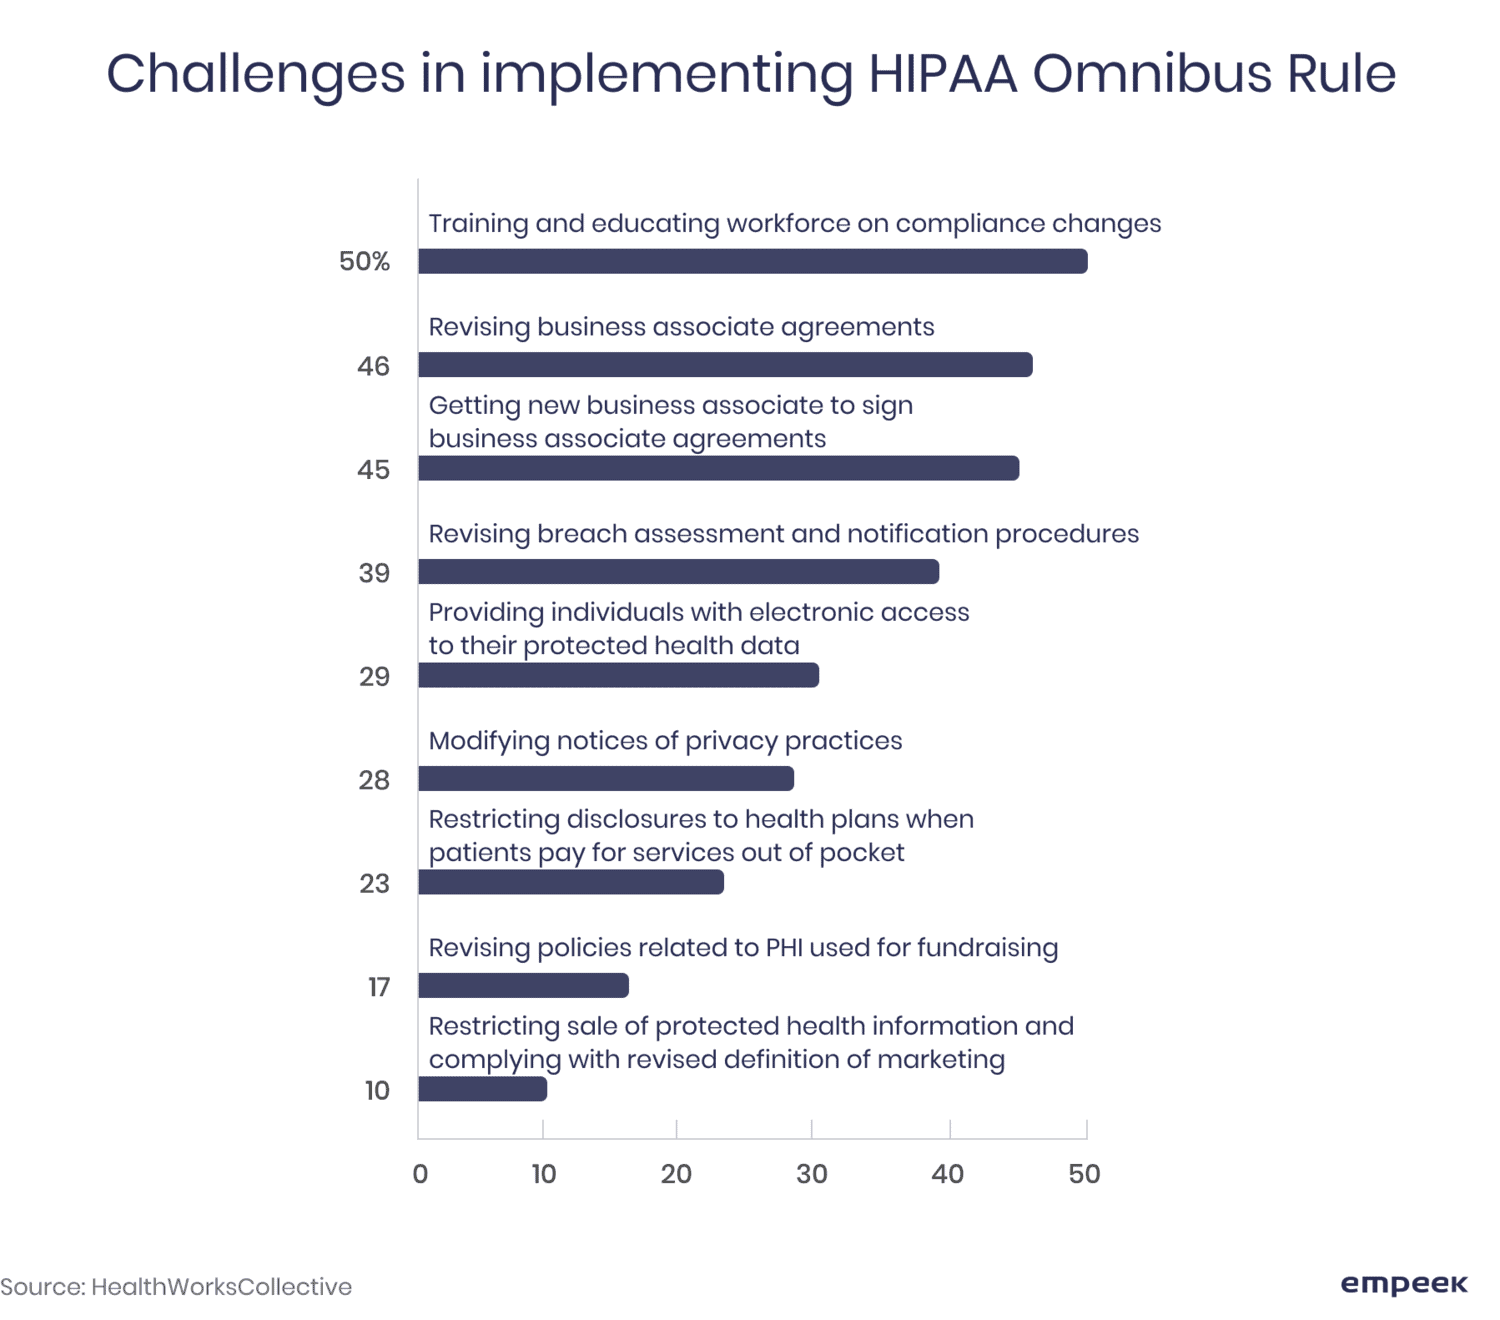 Challenges in implementing HIPAA Omnibus Rule chart